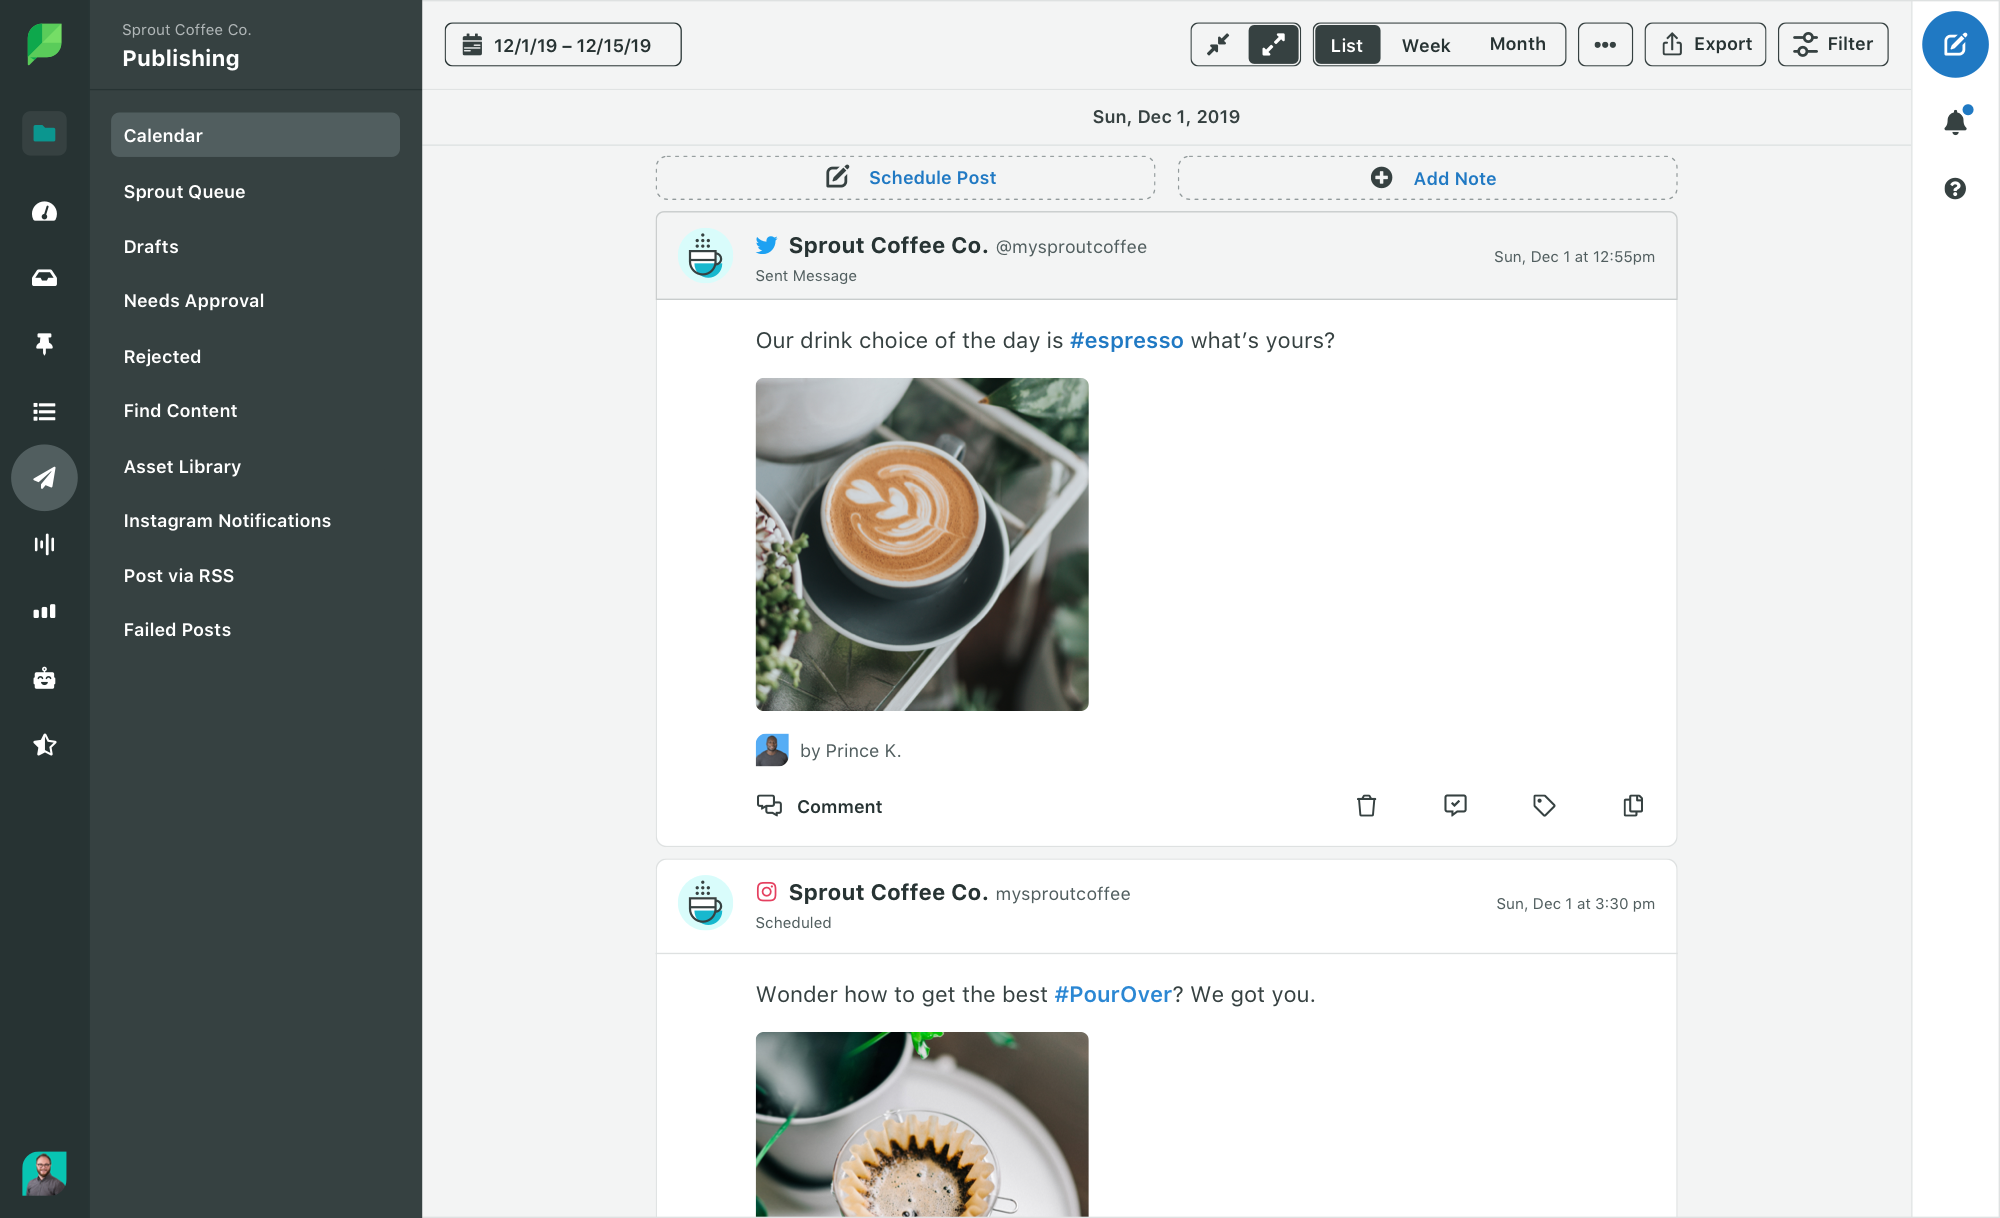 View your scheduled Tweets and posts in Sprout Social in a list format.